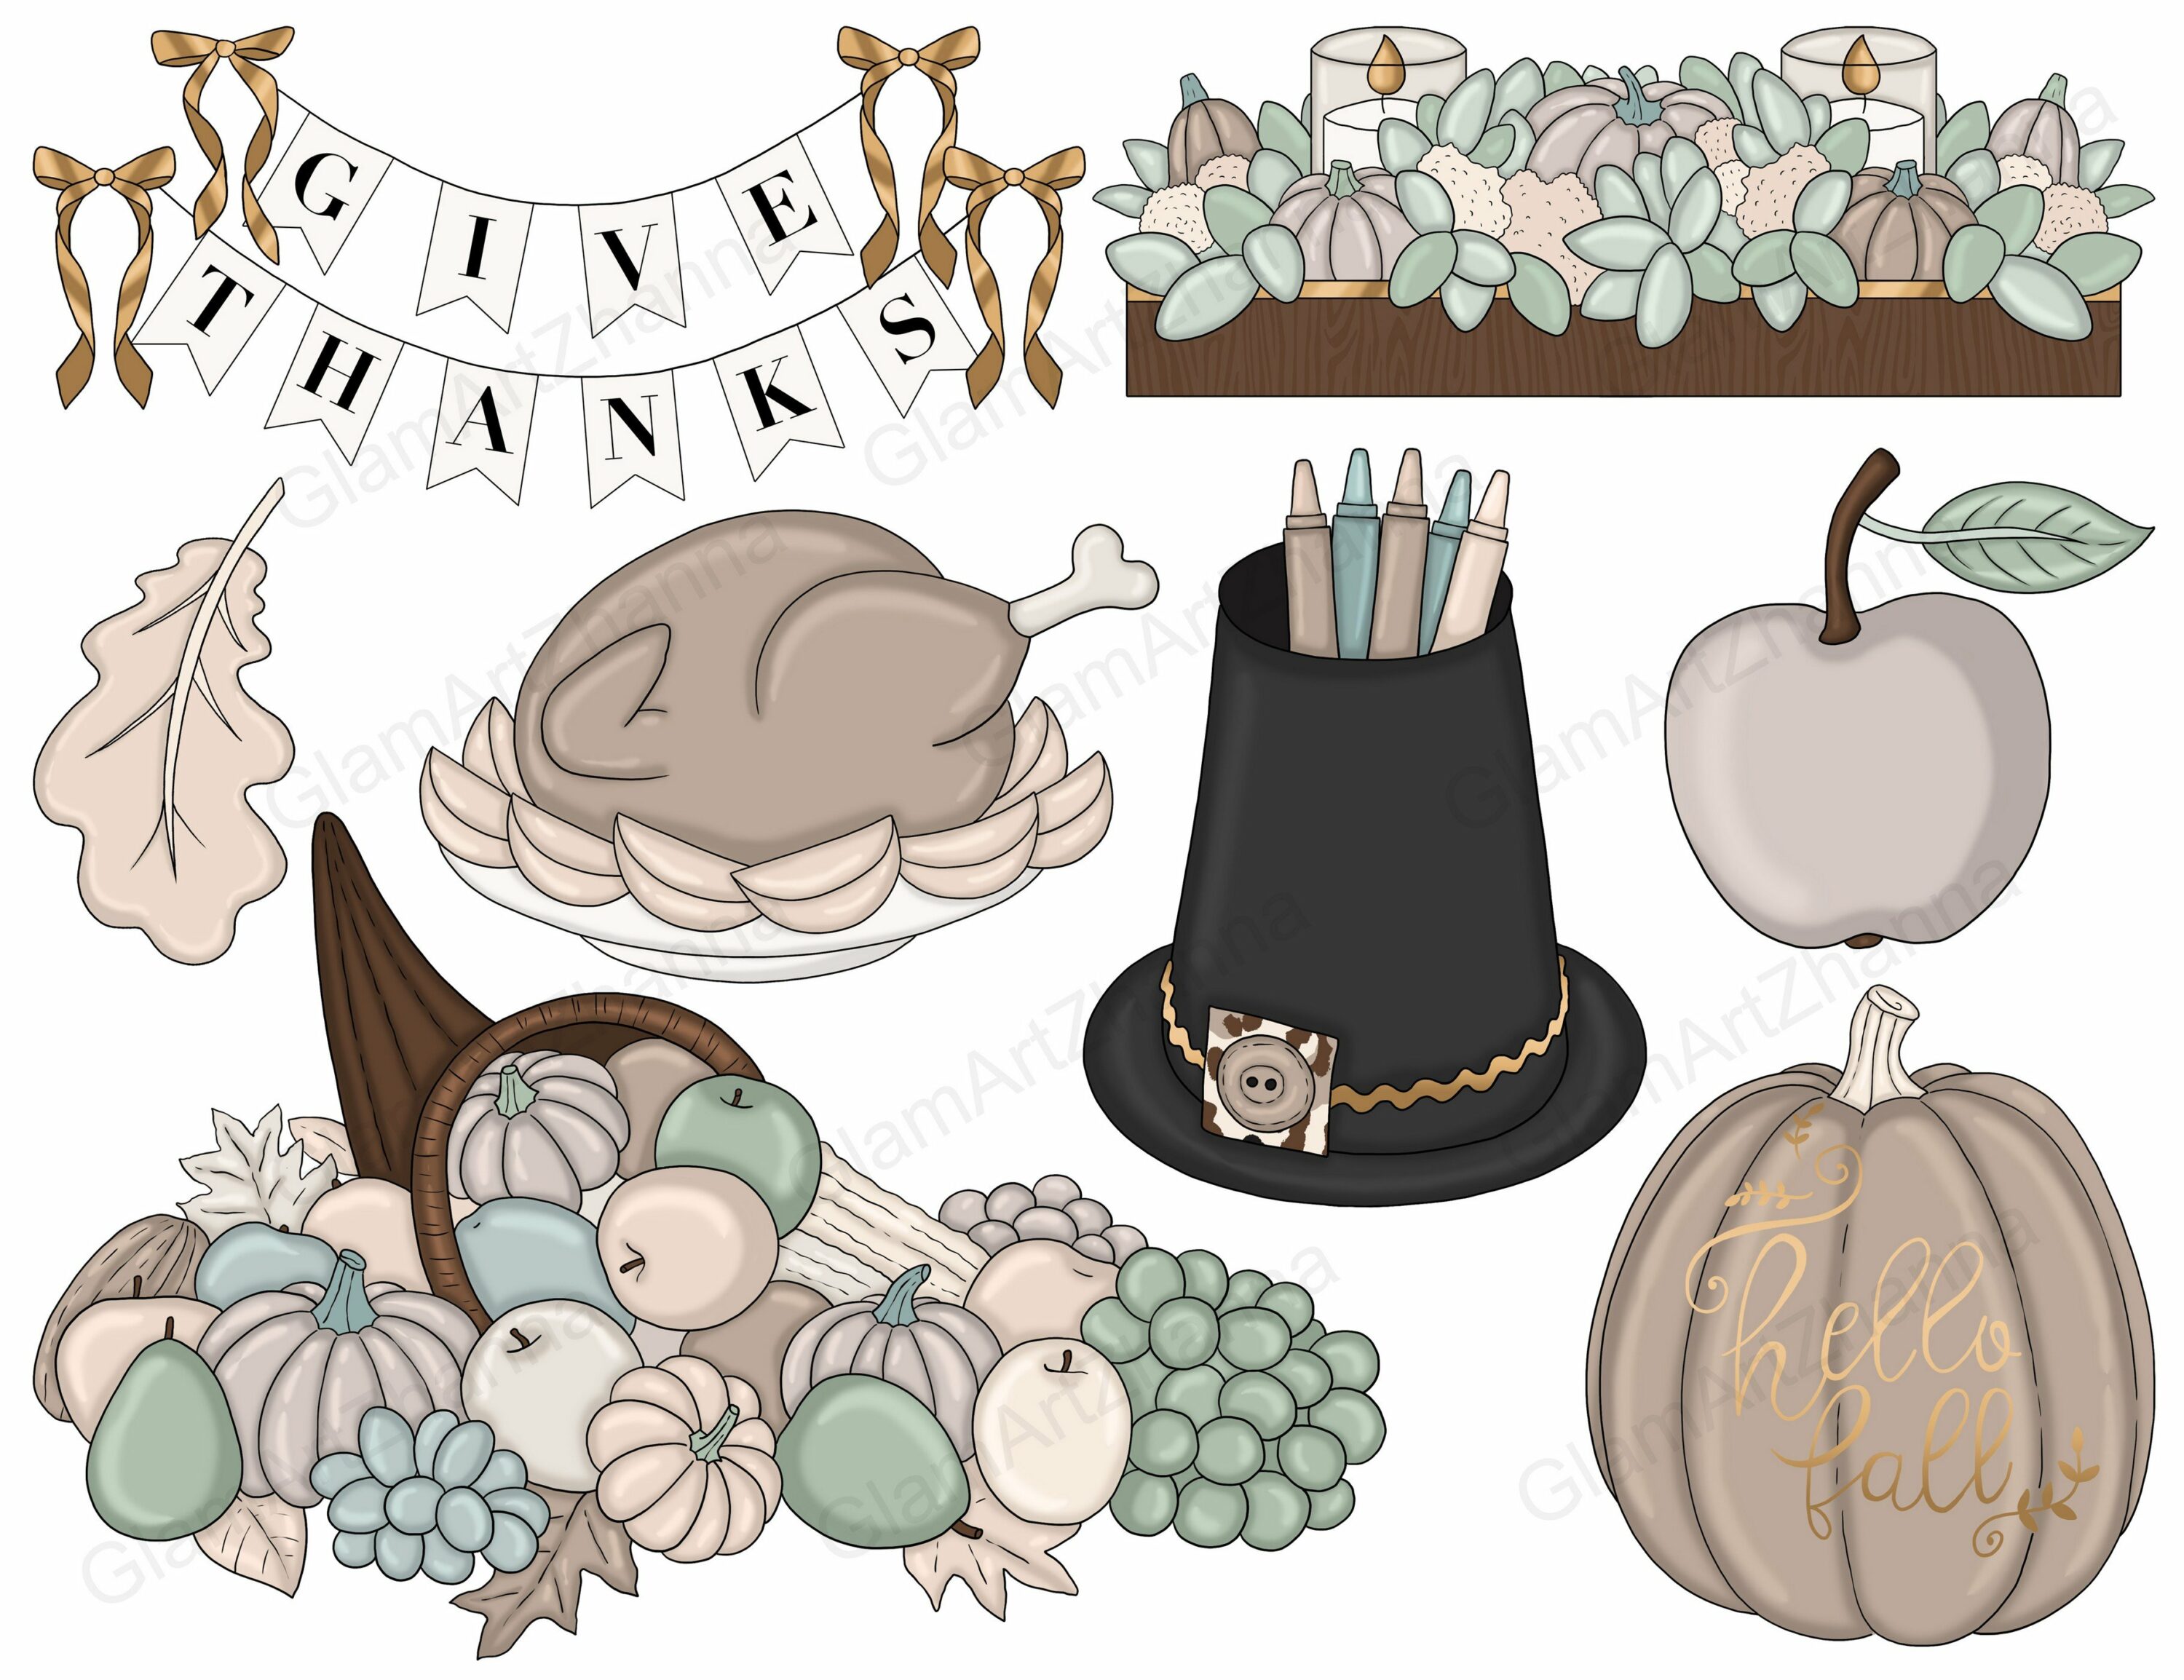 So beautiful thanksgiving items for perfect Thanksgiving mood.